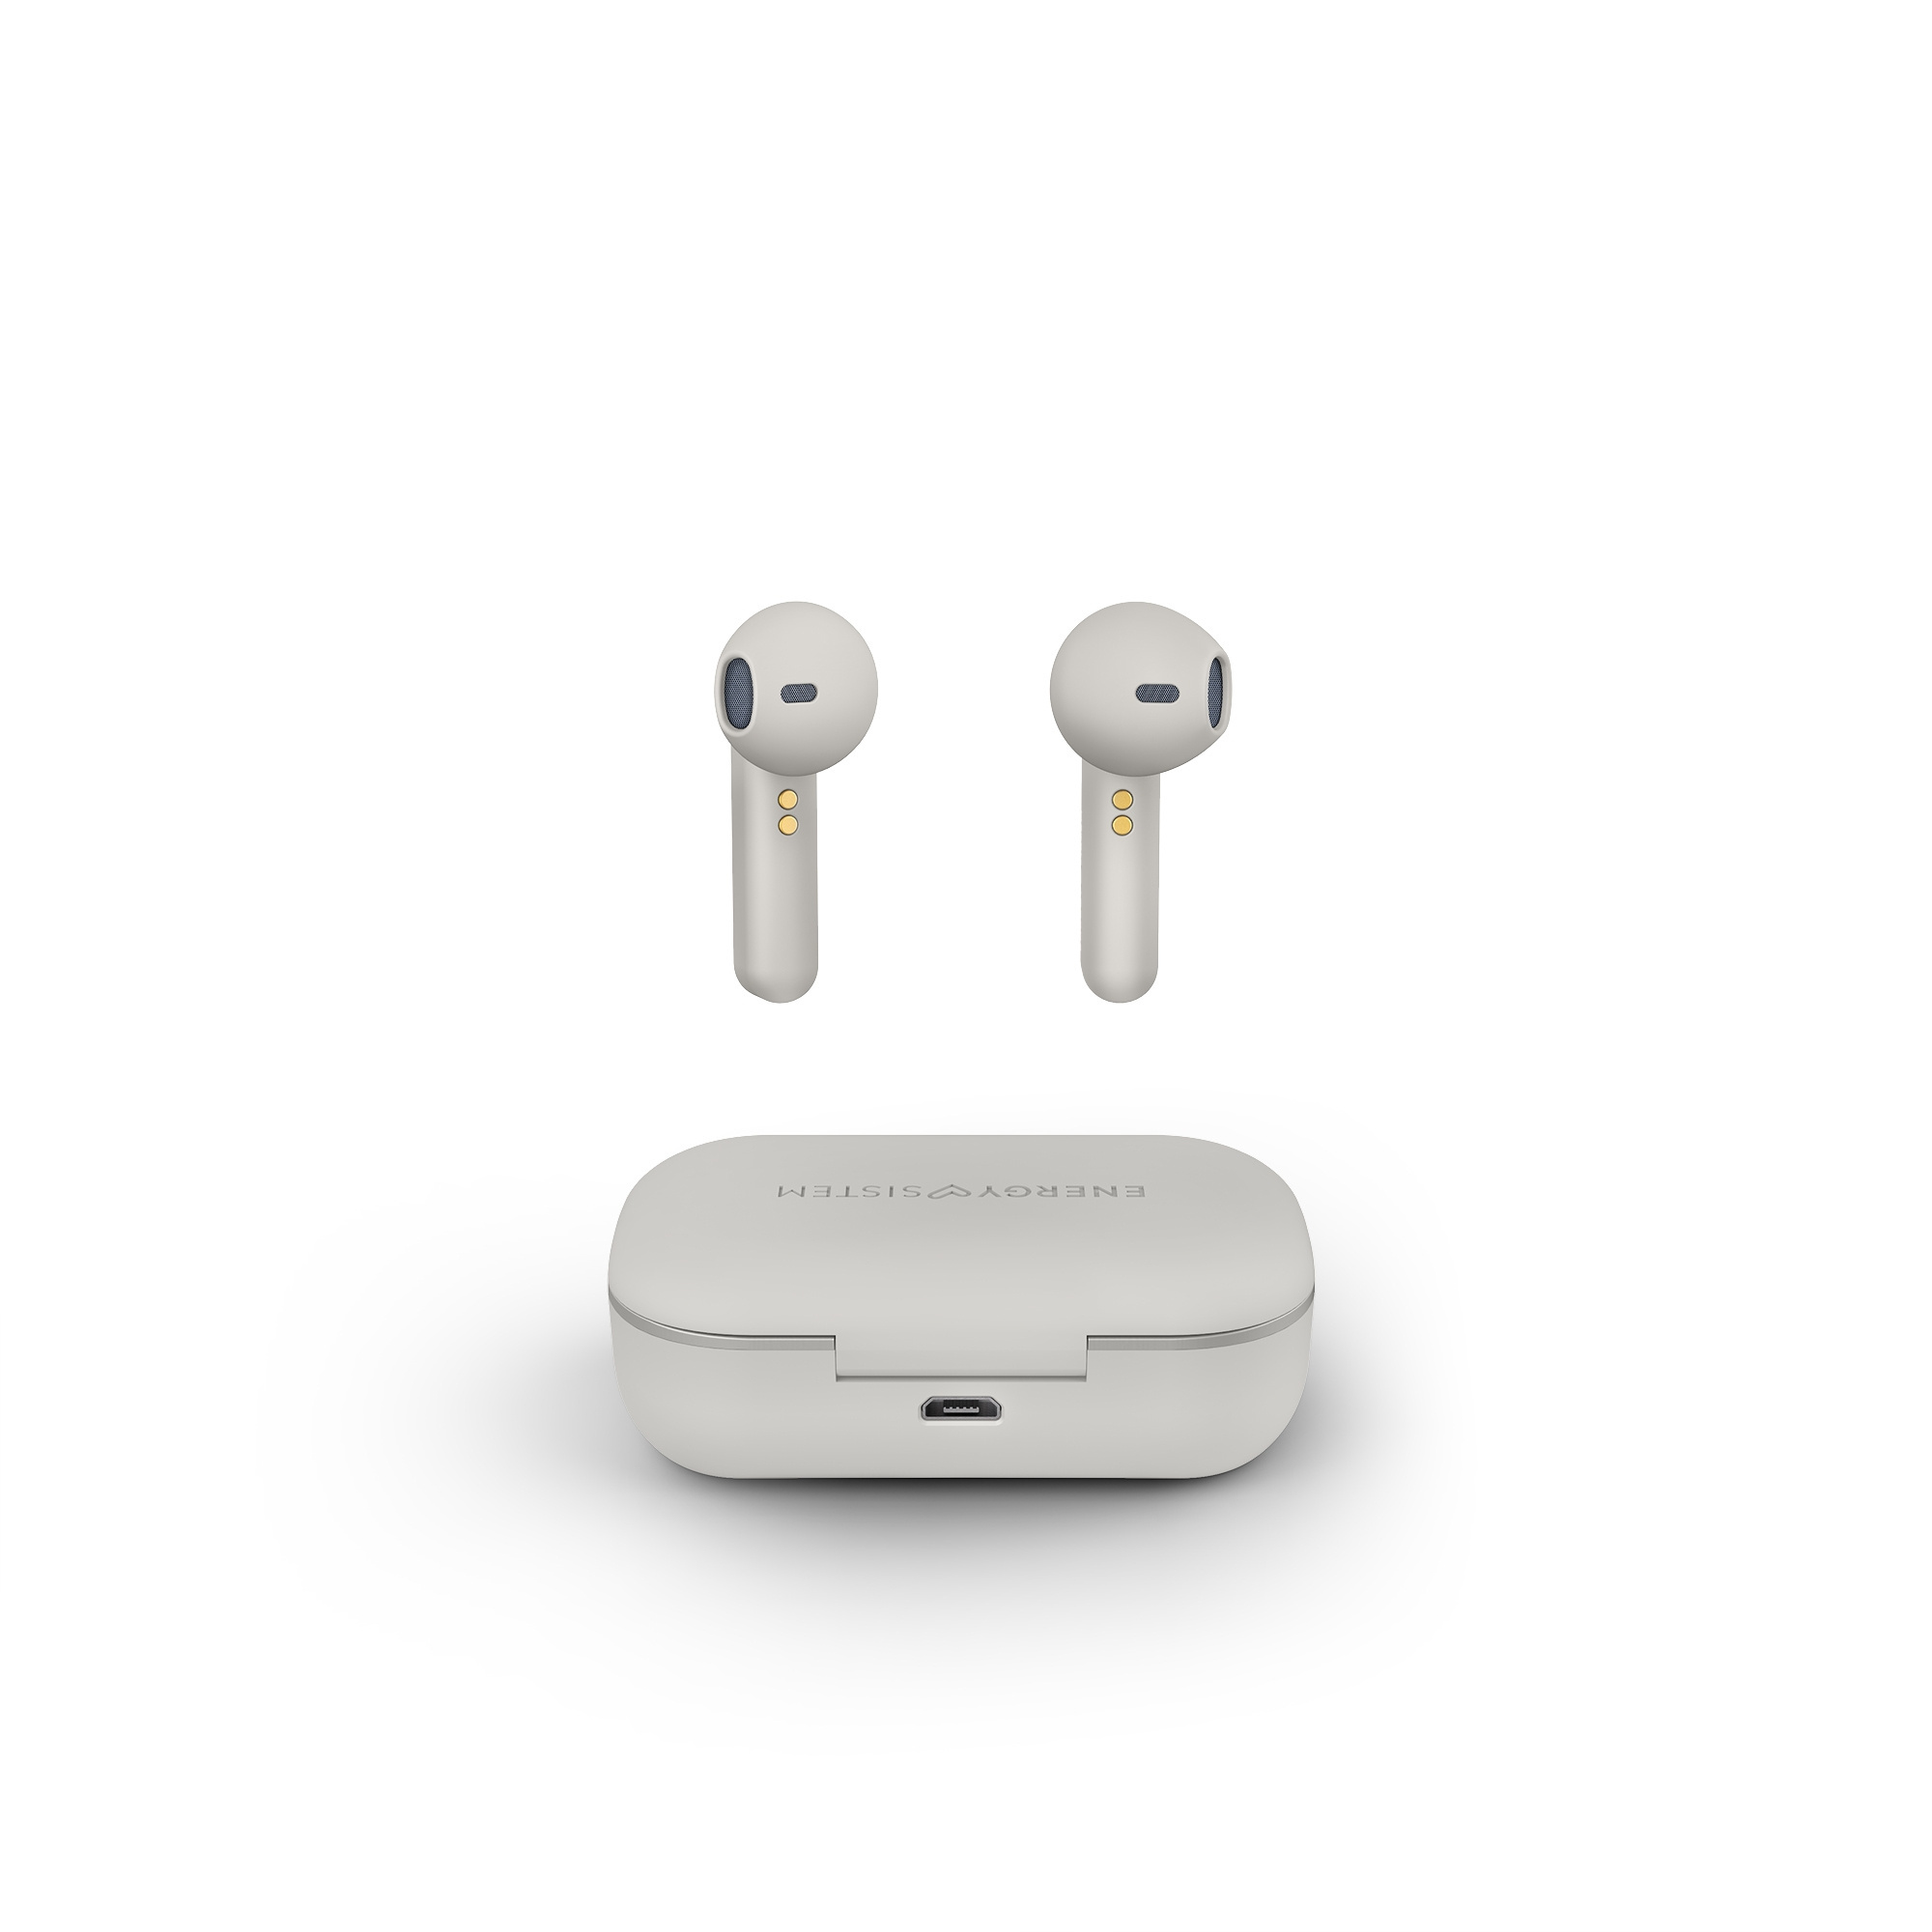 Easy Connect feature: the earbuds will sync automatically